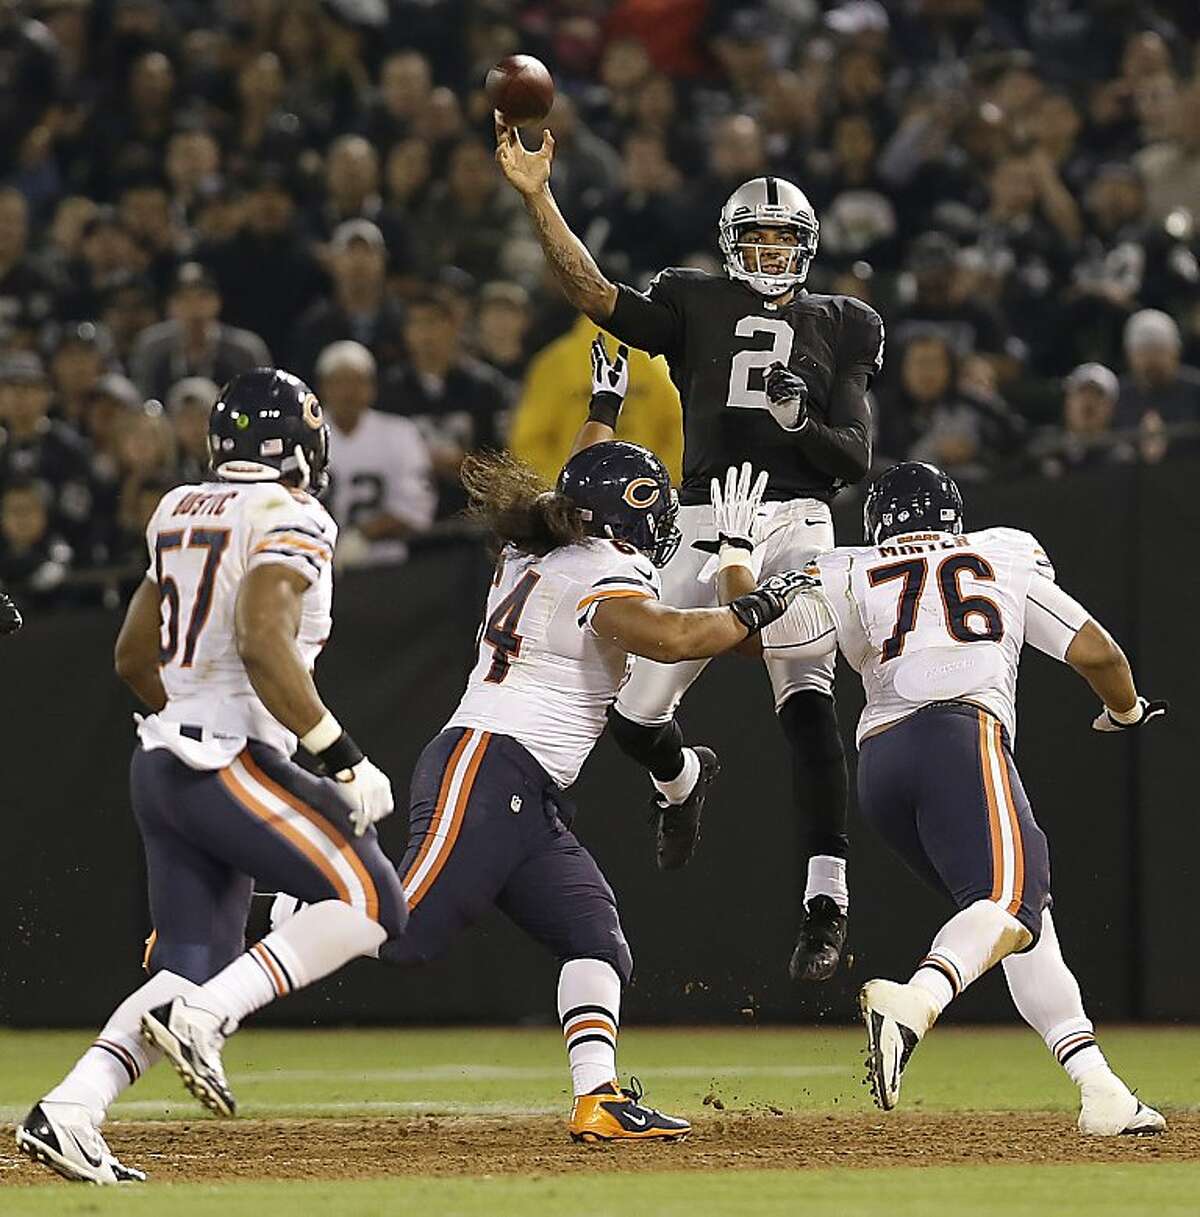 Oakland Raiders quarterback Terrelle Pryor (2) throws as Chicago Bears inside linebacker Jon Bostic (57), defensive tackle Christian Tupou (64), and defensive tackle Zach Minter (76) apply pressure during the third quarter of an NFL preseason football game in Oakland, Calif., Friday, Aug. 23, 2013. (AP Photo/Marcio Jose Sanchez)